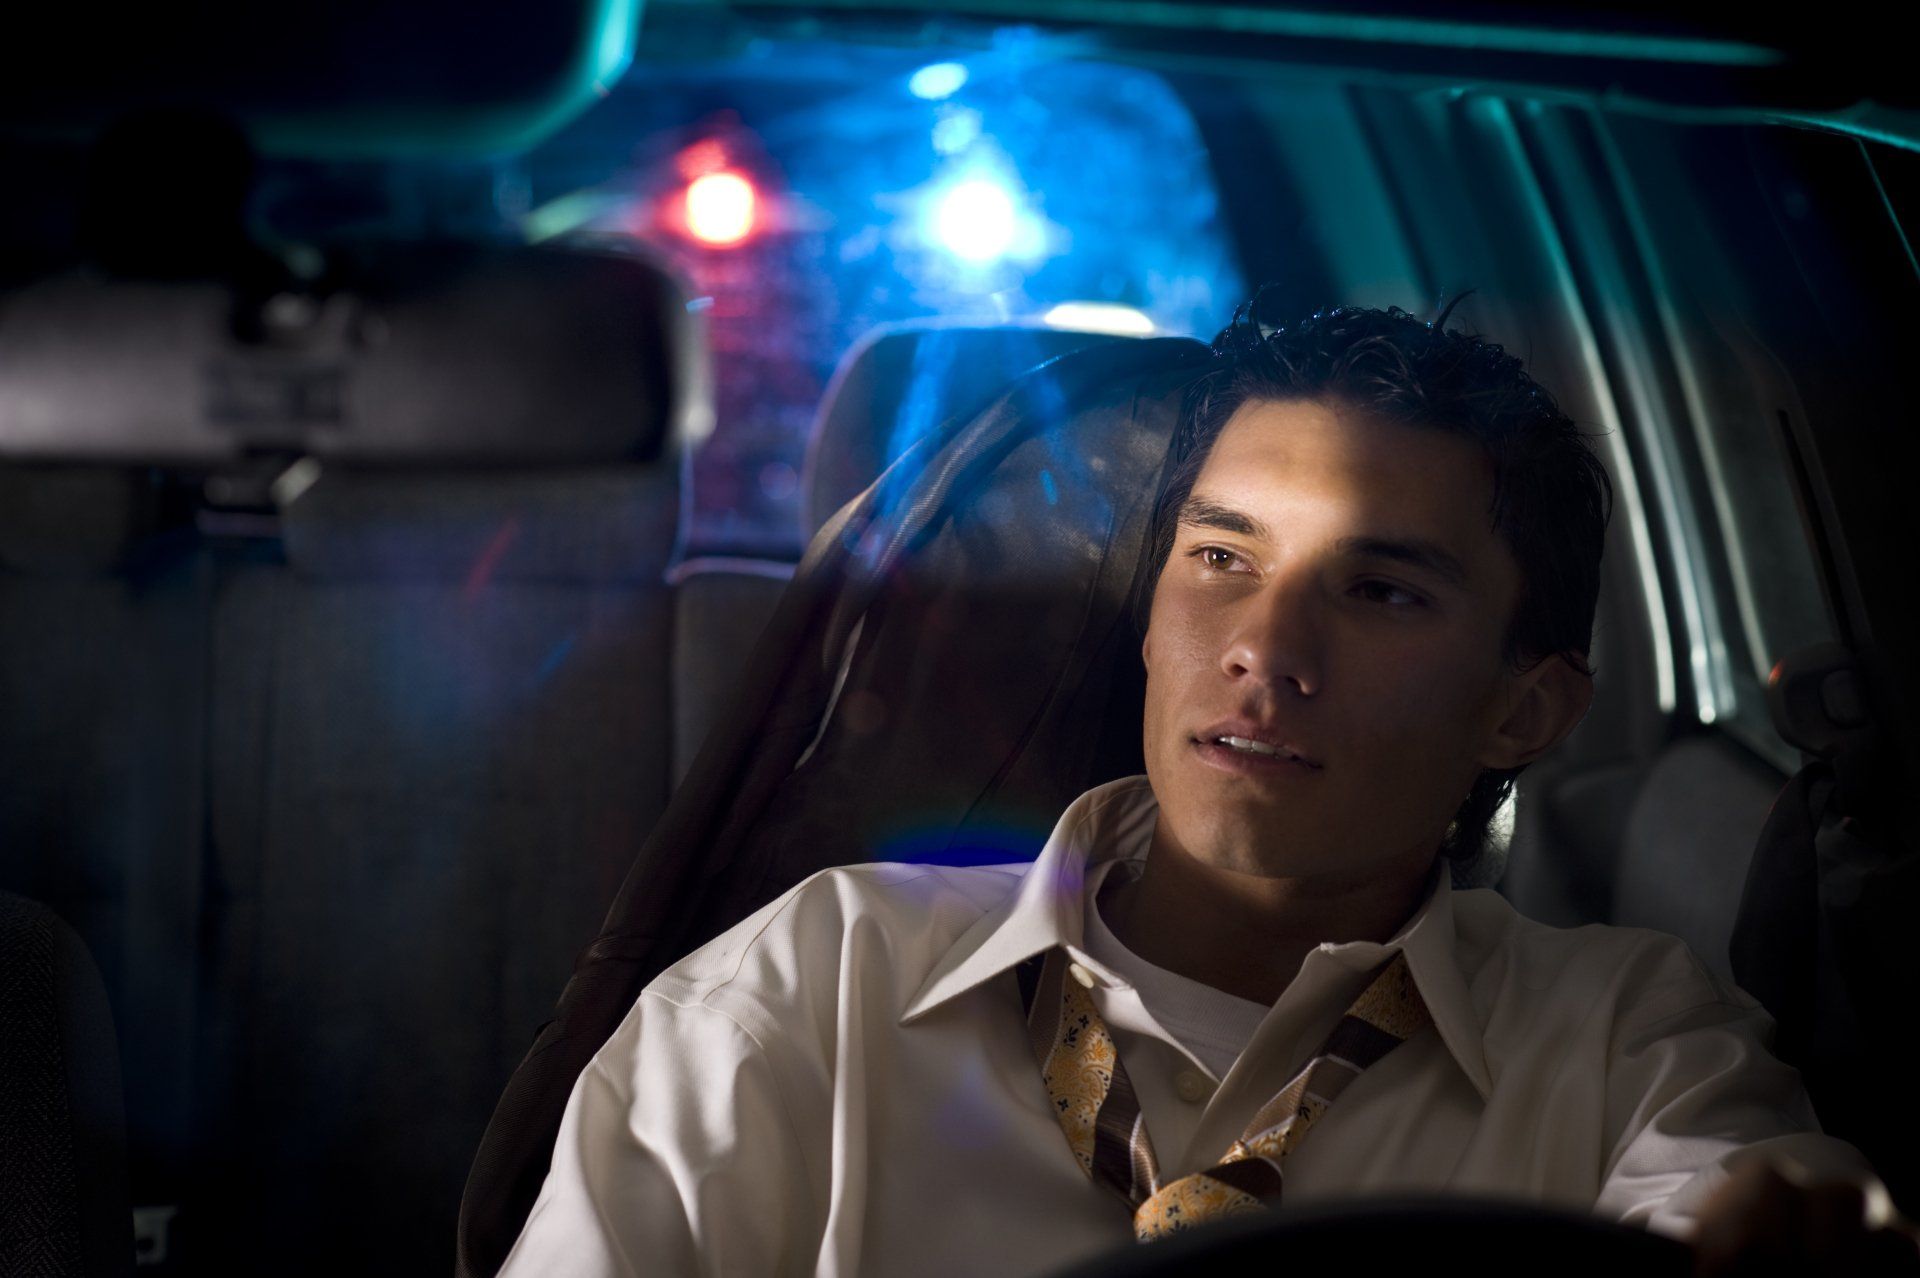 A driver in need of a DUI Defense Lawyer that serves Pasadena, MD